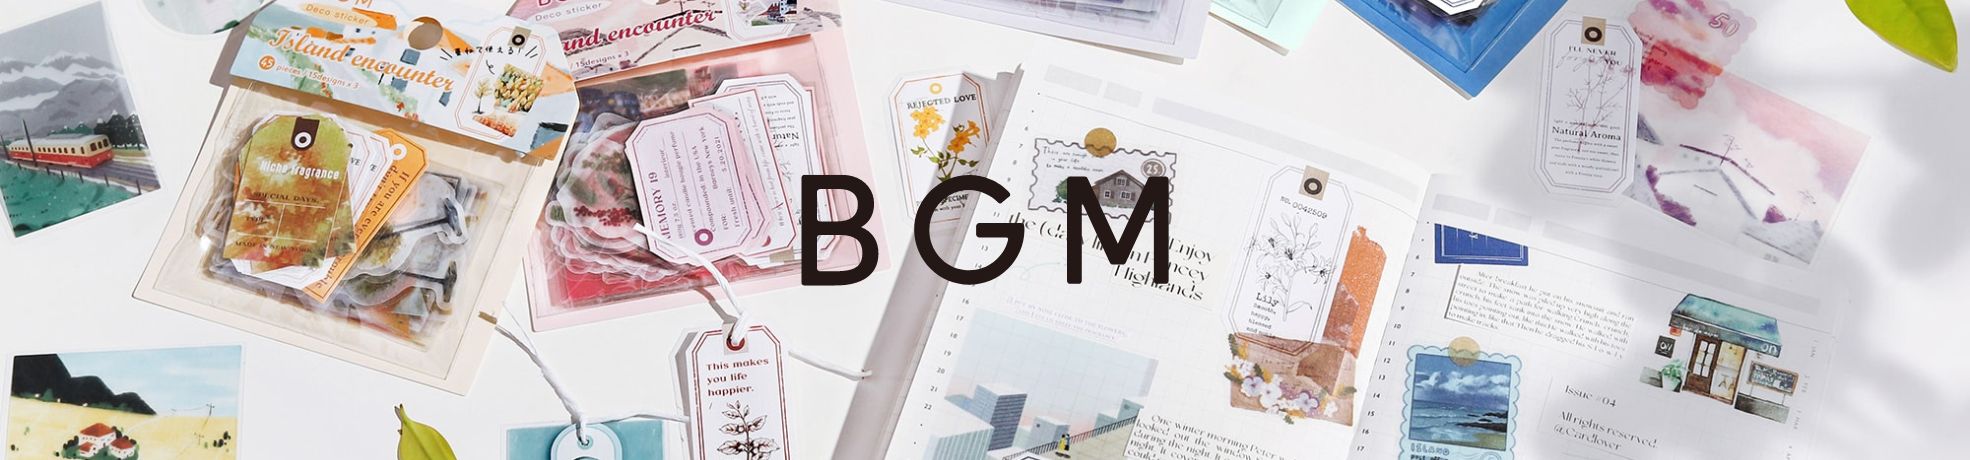 BGM INC Japanese stationery, masking tapes, stickers, and stamps collection - Paper Kooka Australia